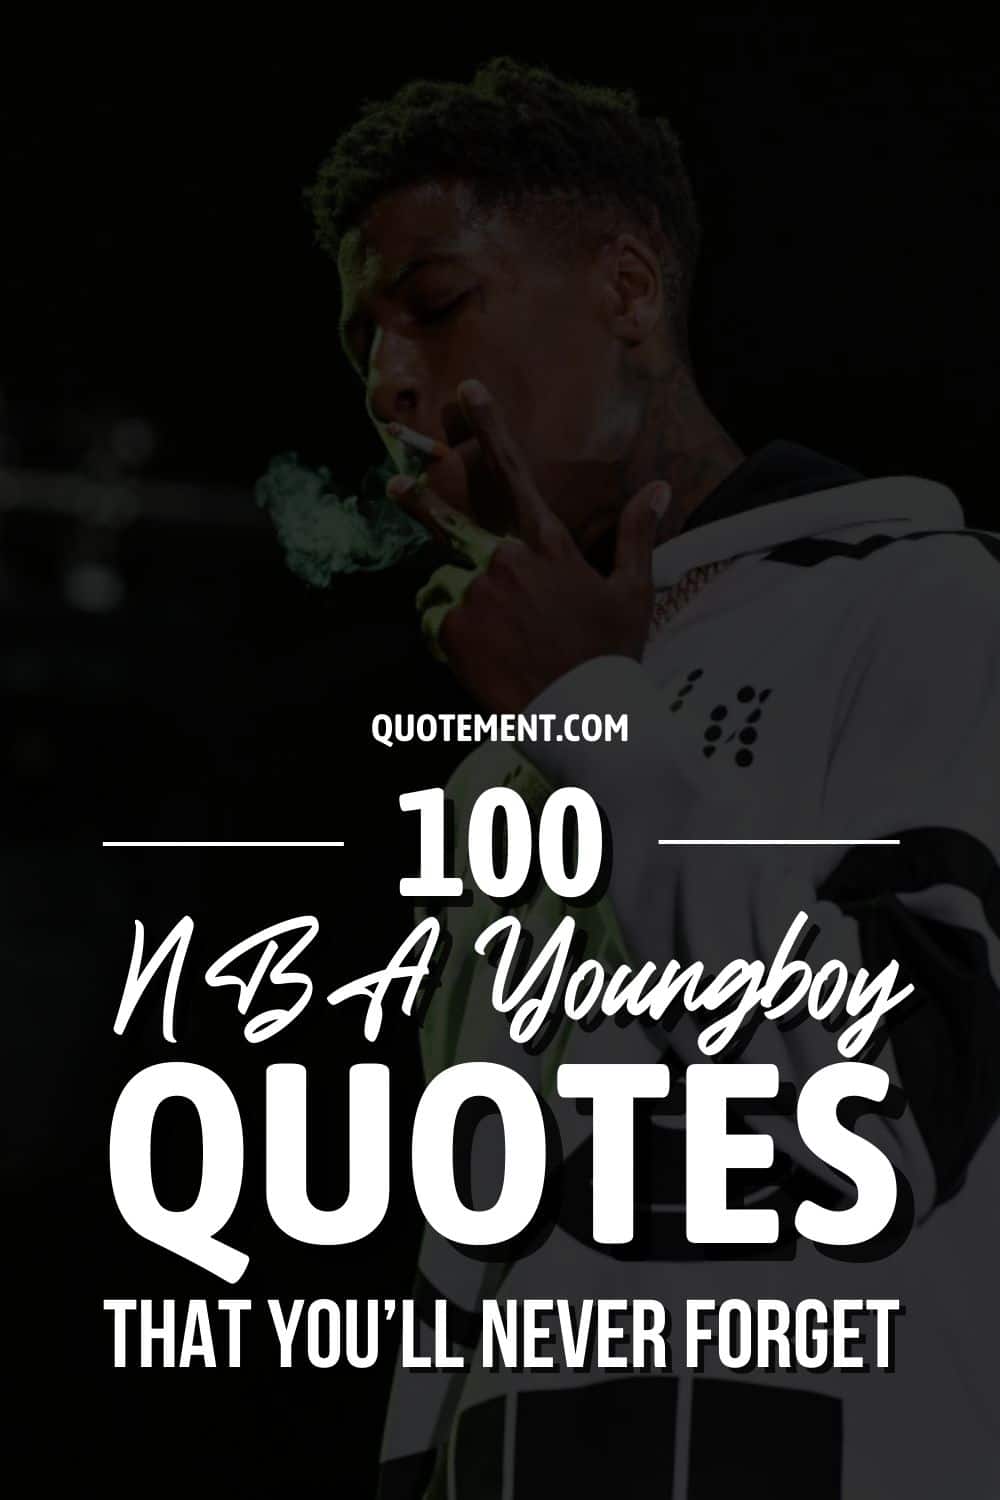 110 NBA Youngboy Quotes That You’ll Never Forget
